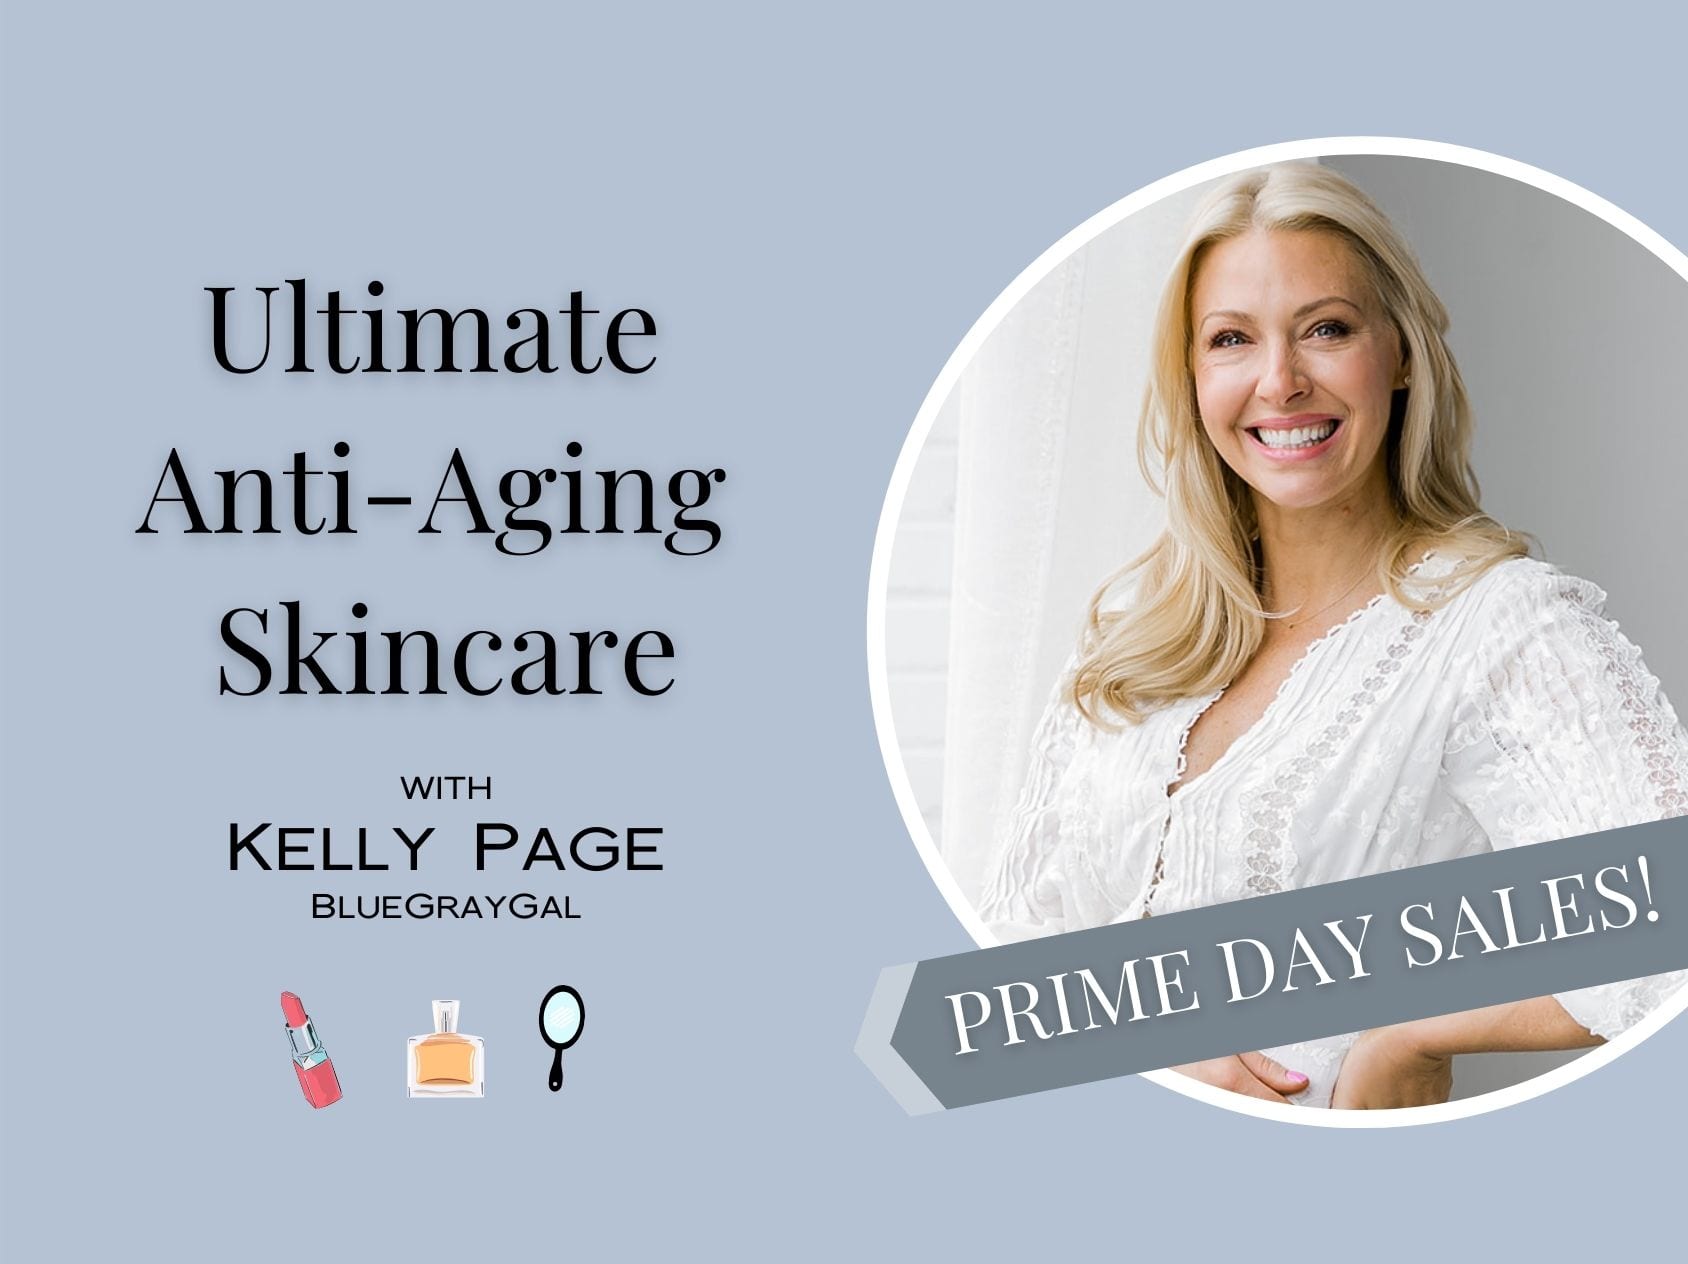 Amazon Live A-List Streamer Kelly Page, or BlueGrayGayl, will host an Amazon Live stream on Amazon Prime Day about Ultimate Anti-Aging Skincare products!